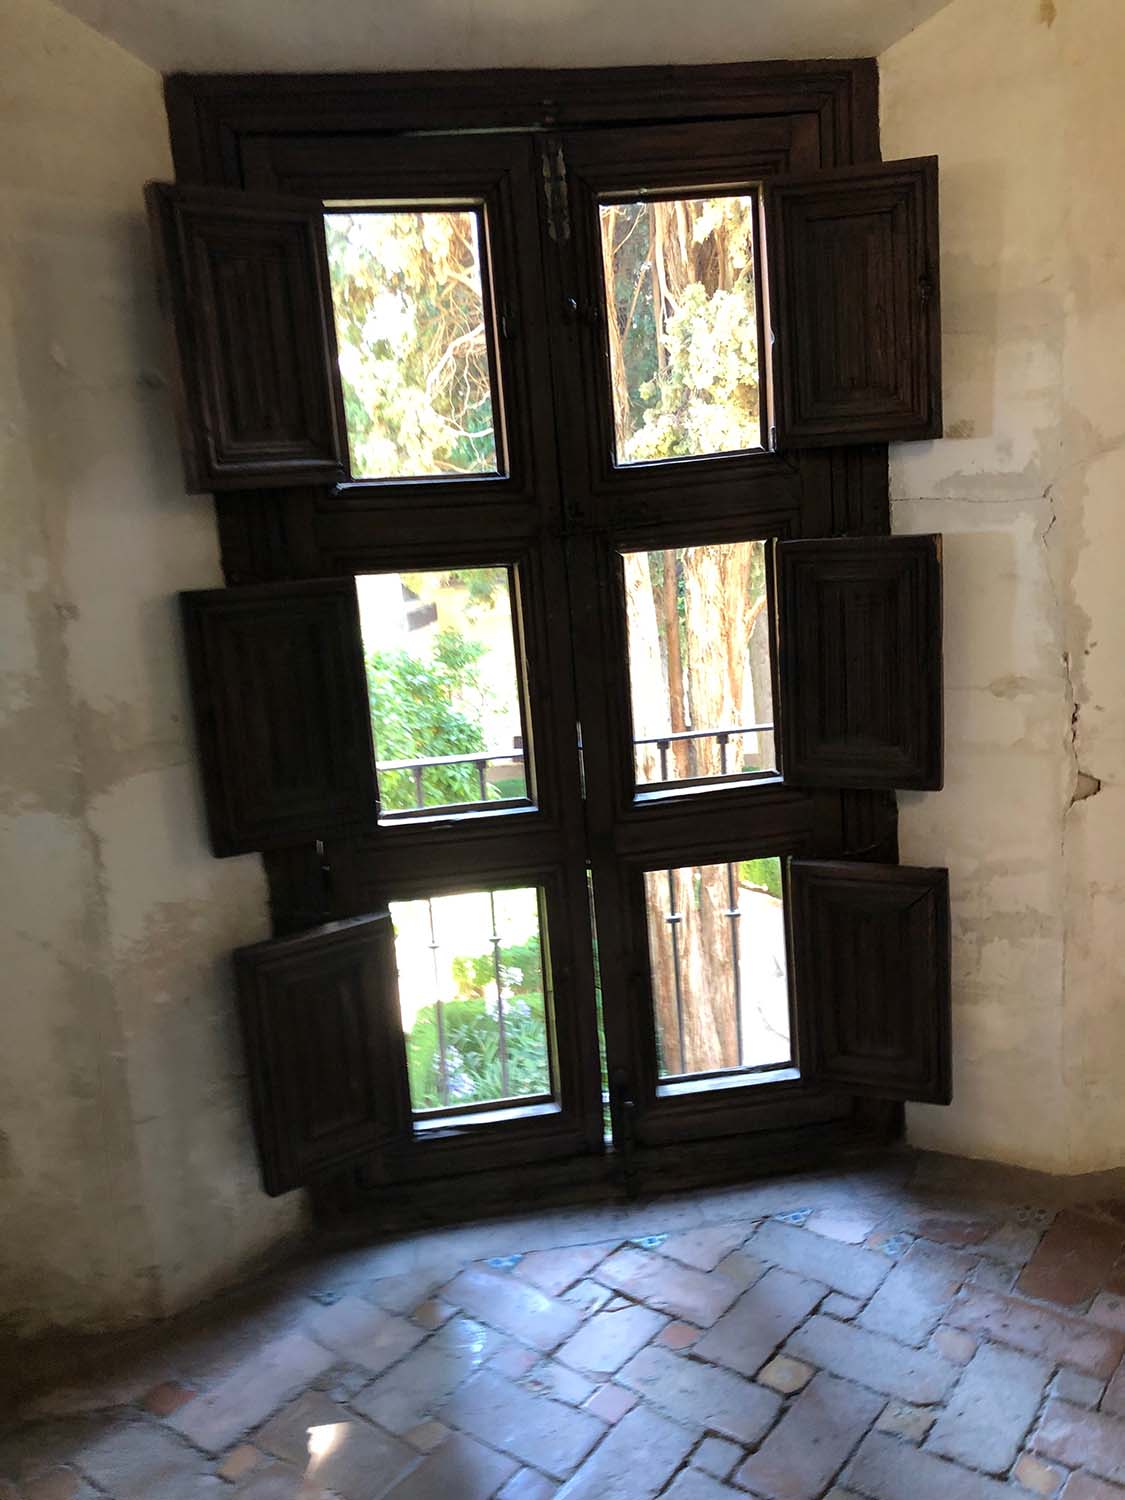 View of a window in the Emperor's Chambers